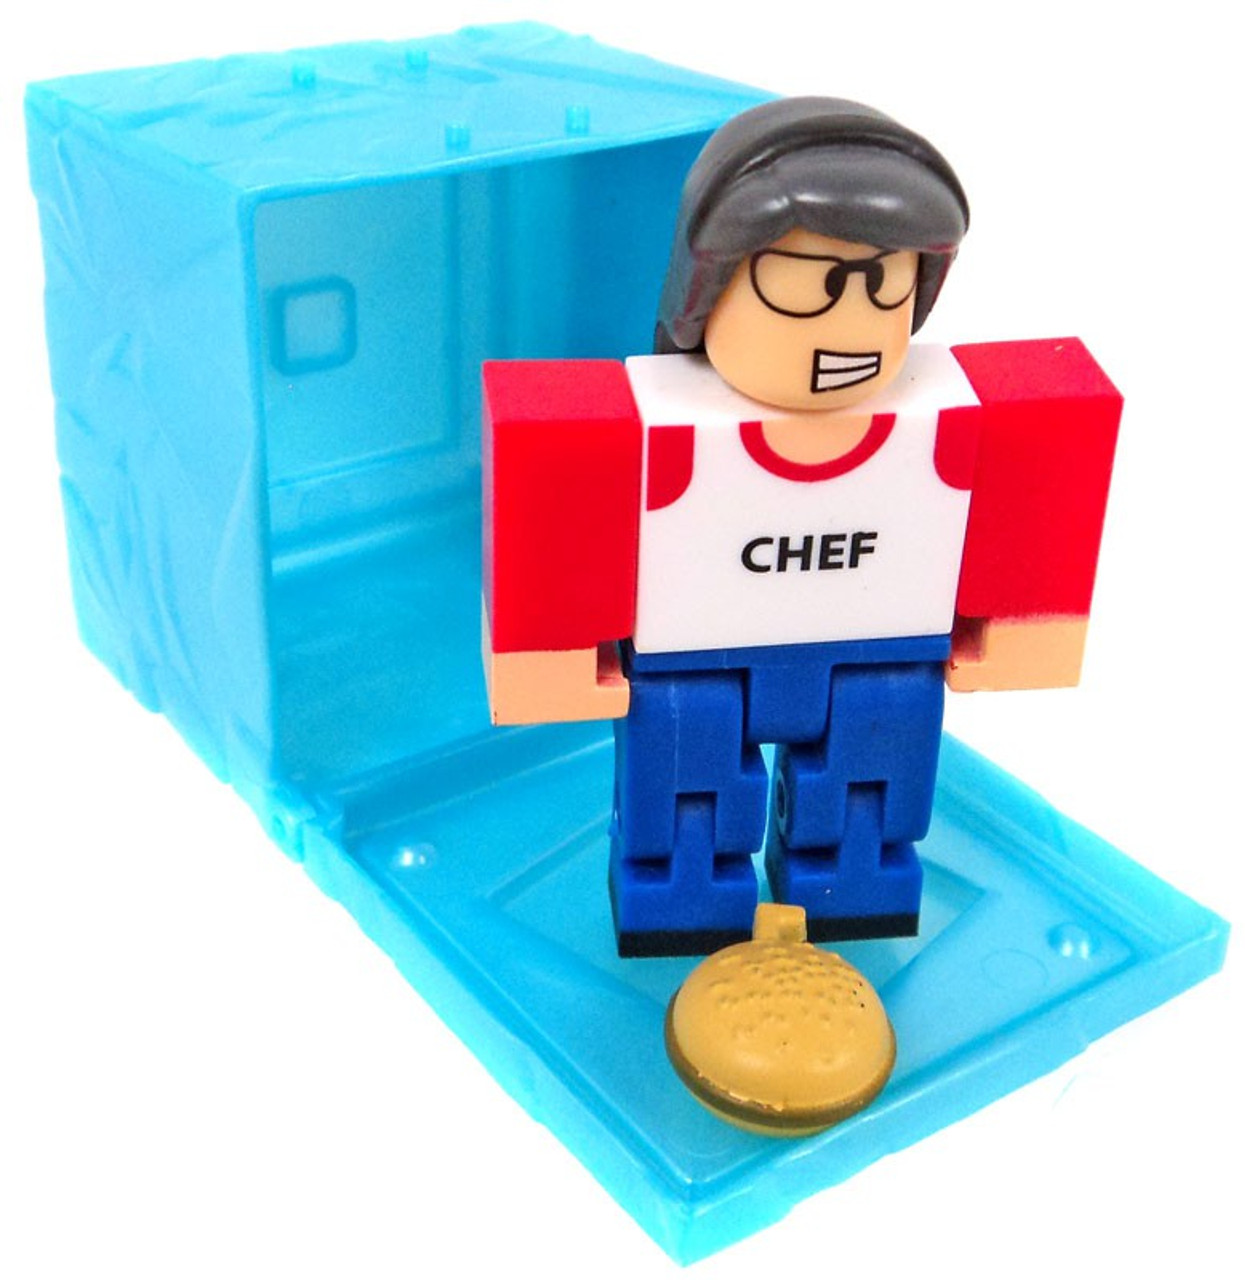 Roblox Red Series 3 High School Life Lunch Lady 3 Mini Figure Blue Cube With Online Code Loose Jazwares Toywiz - the plaza club dj roblox figure with virtual code series 3 new